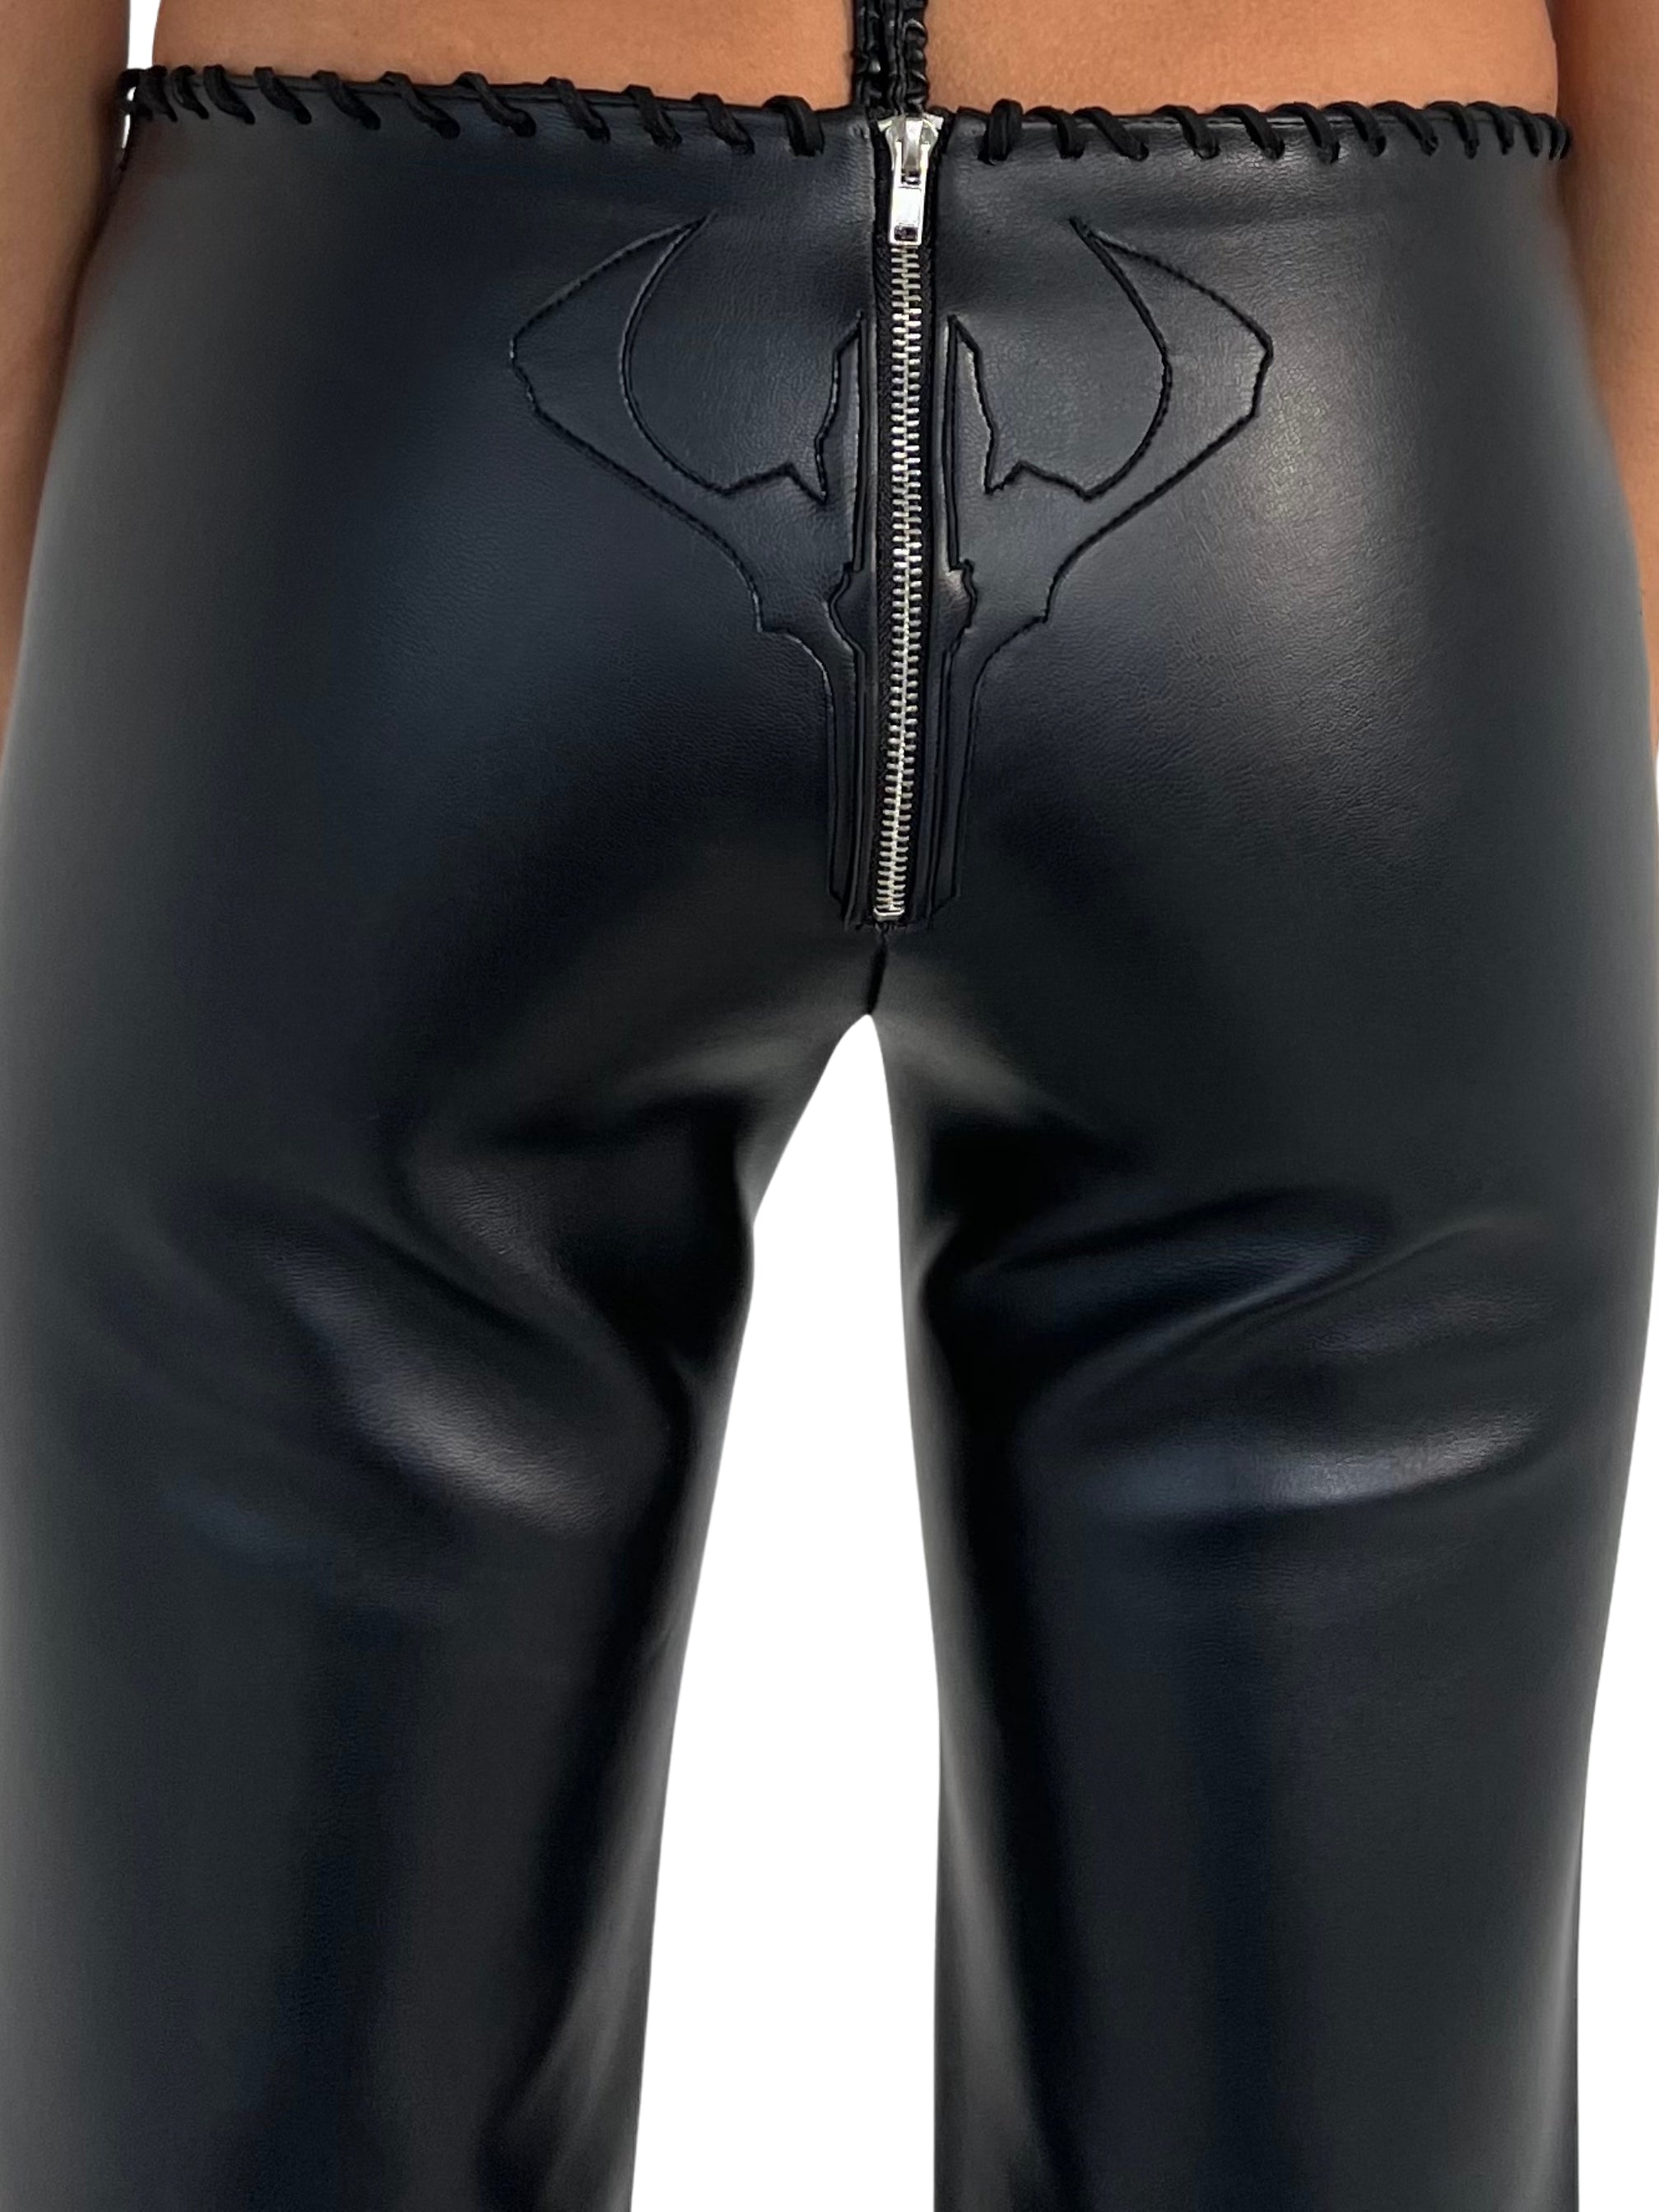 LOW RISE LEATHER CREST PANTS - SIREN THE BRAND